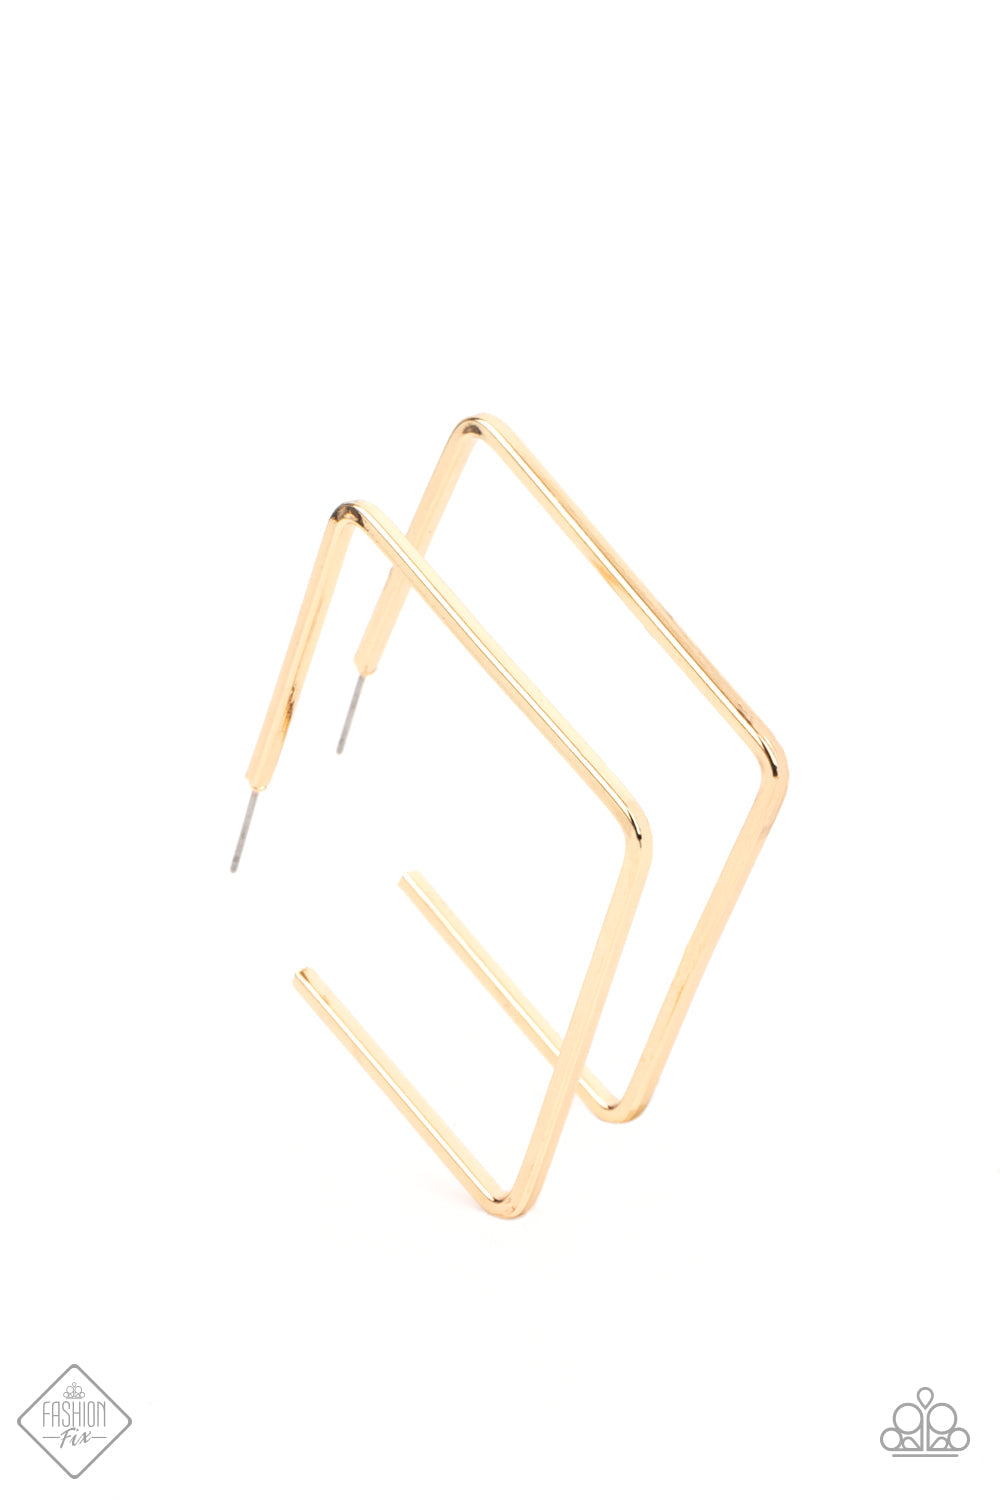 ​​​​Material Girl Magic - Gold Square Hoop Earrings - Paparazzi Accessories - A deceptively simple square frame is tilted on point to create a geometric hoop. Its sharp angles are complemented by its rich gold finish, making a lasting impression. Earring attaches to a standard post fitting. Hoop measures approximately 2" in diameter. Sold as one pair of hoop earrings.